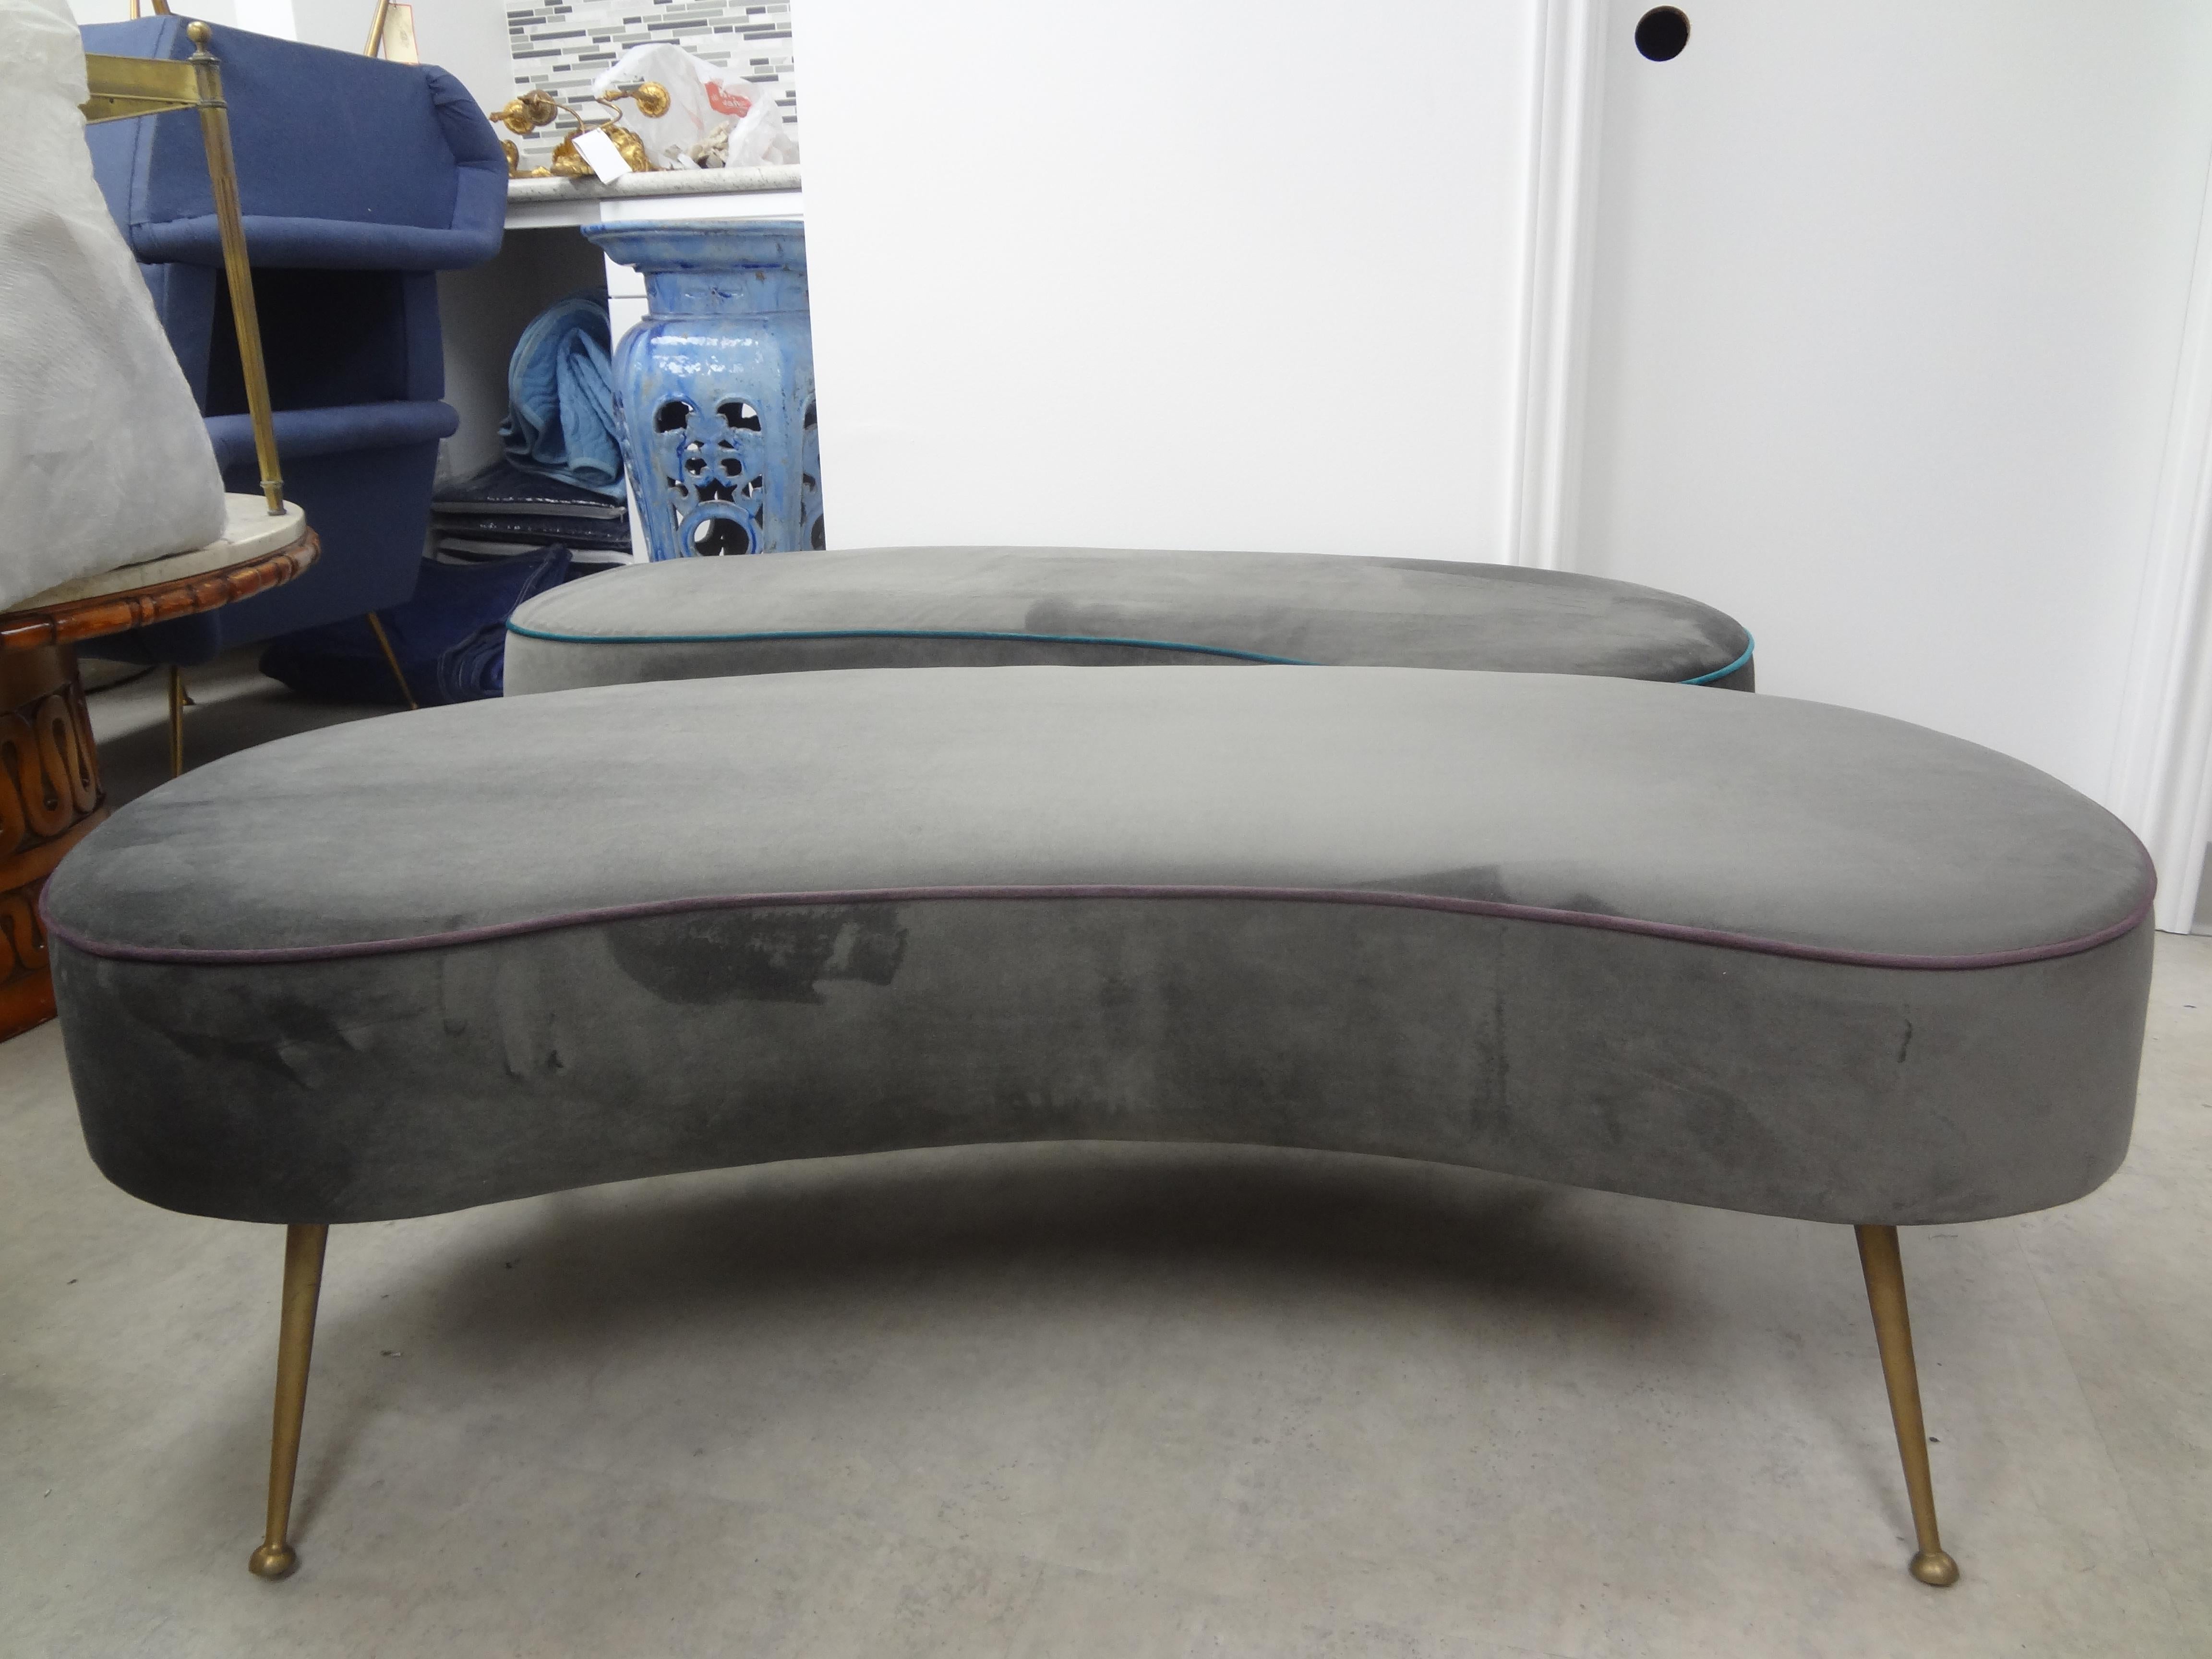 Large Italian Gio Ponti inspired curved bench with splayed brass legs. This stunning Italian modern curved bench with brass splayed legs is upholstered in gray velvet with magenta piping. Easy to re-upholster in the fabric of your choice. Perfect